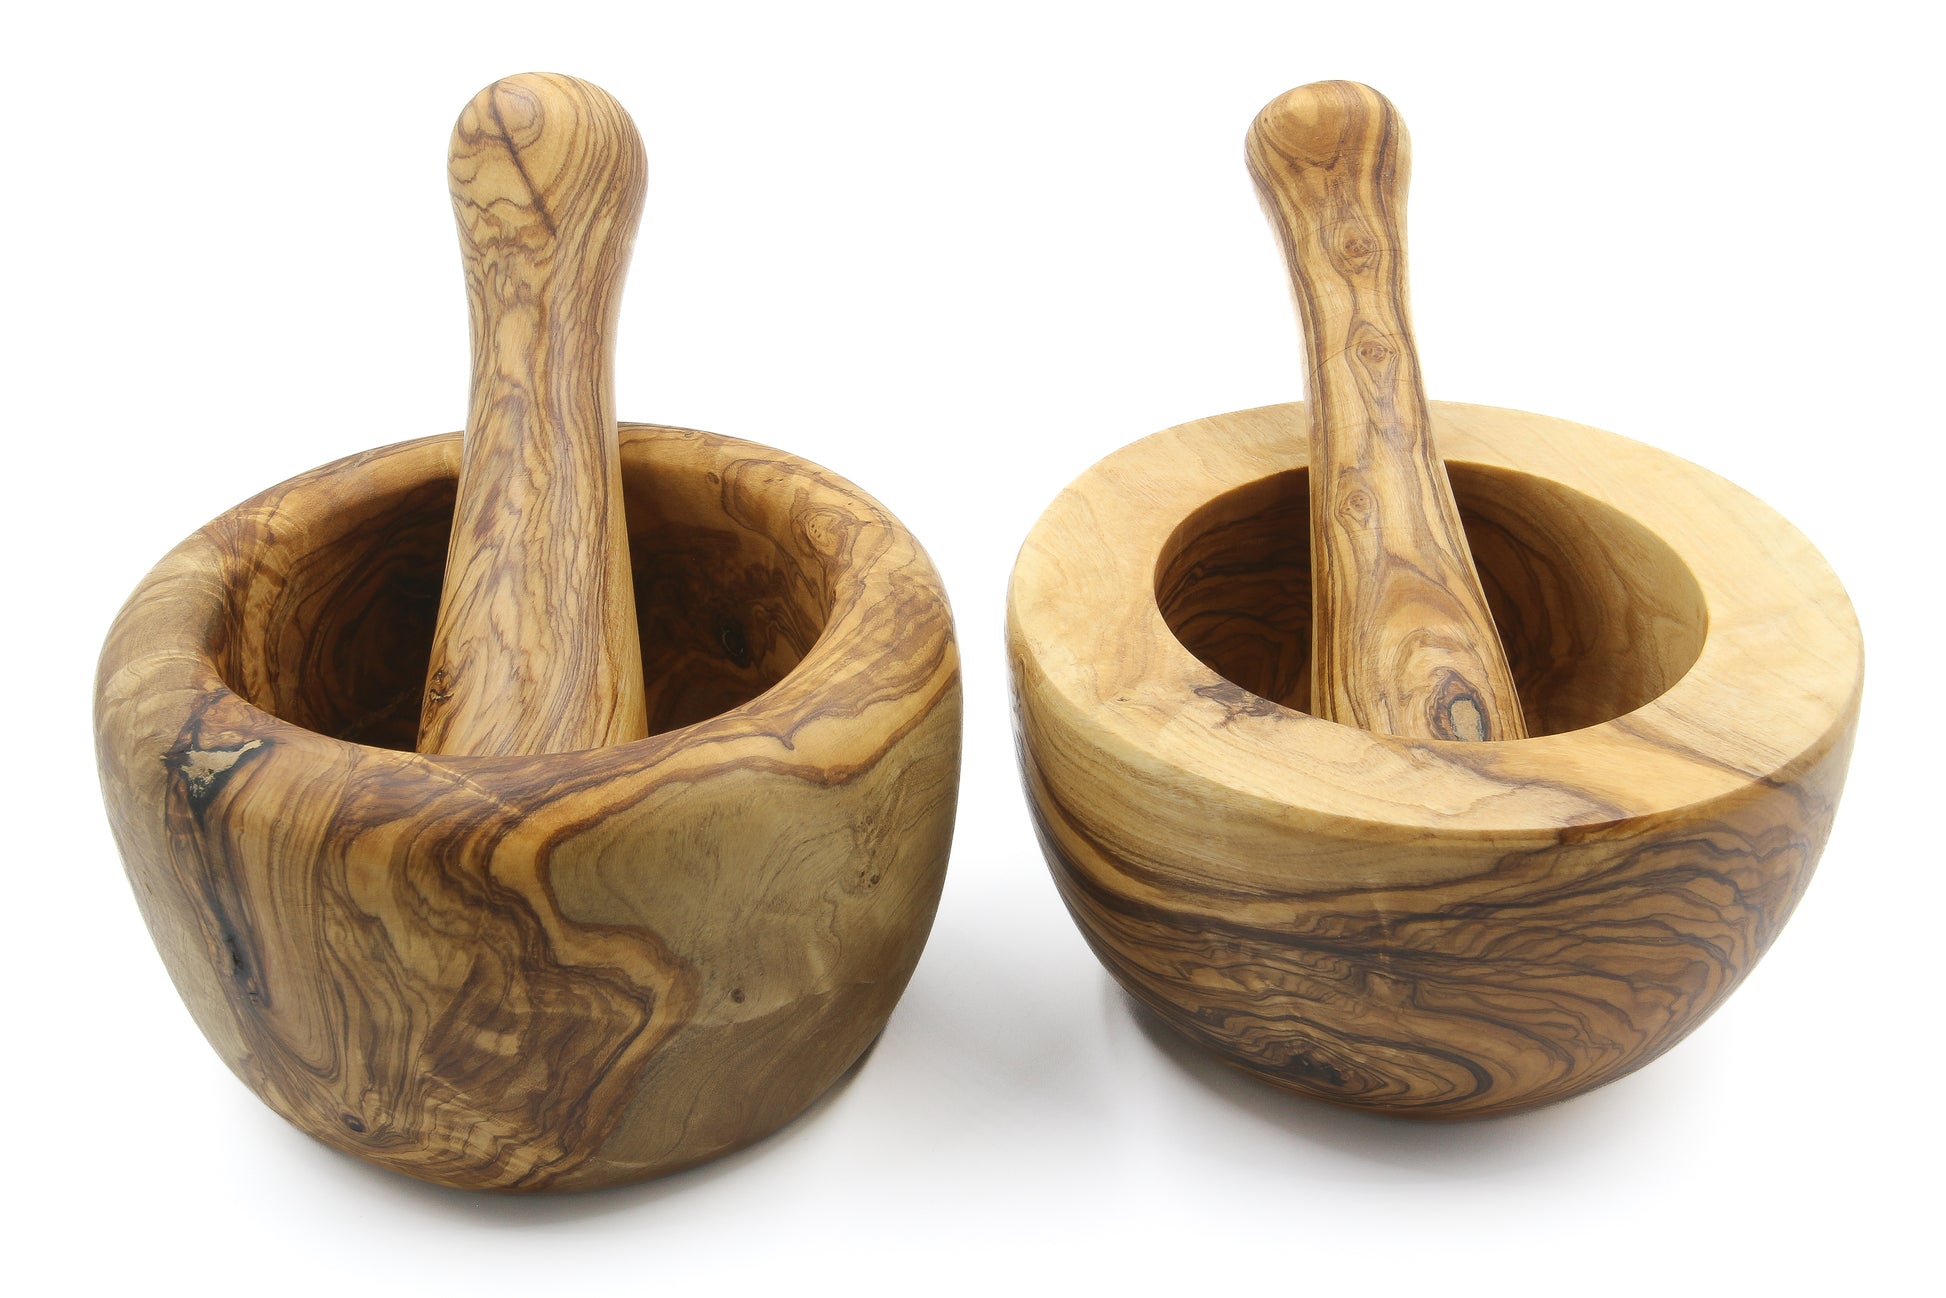 Olive wood mortar and pestle with a classic design